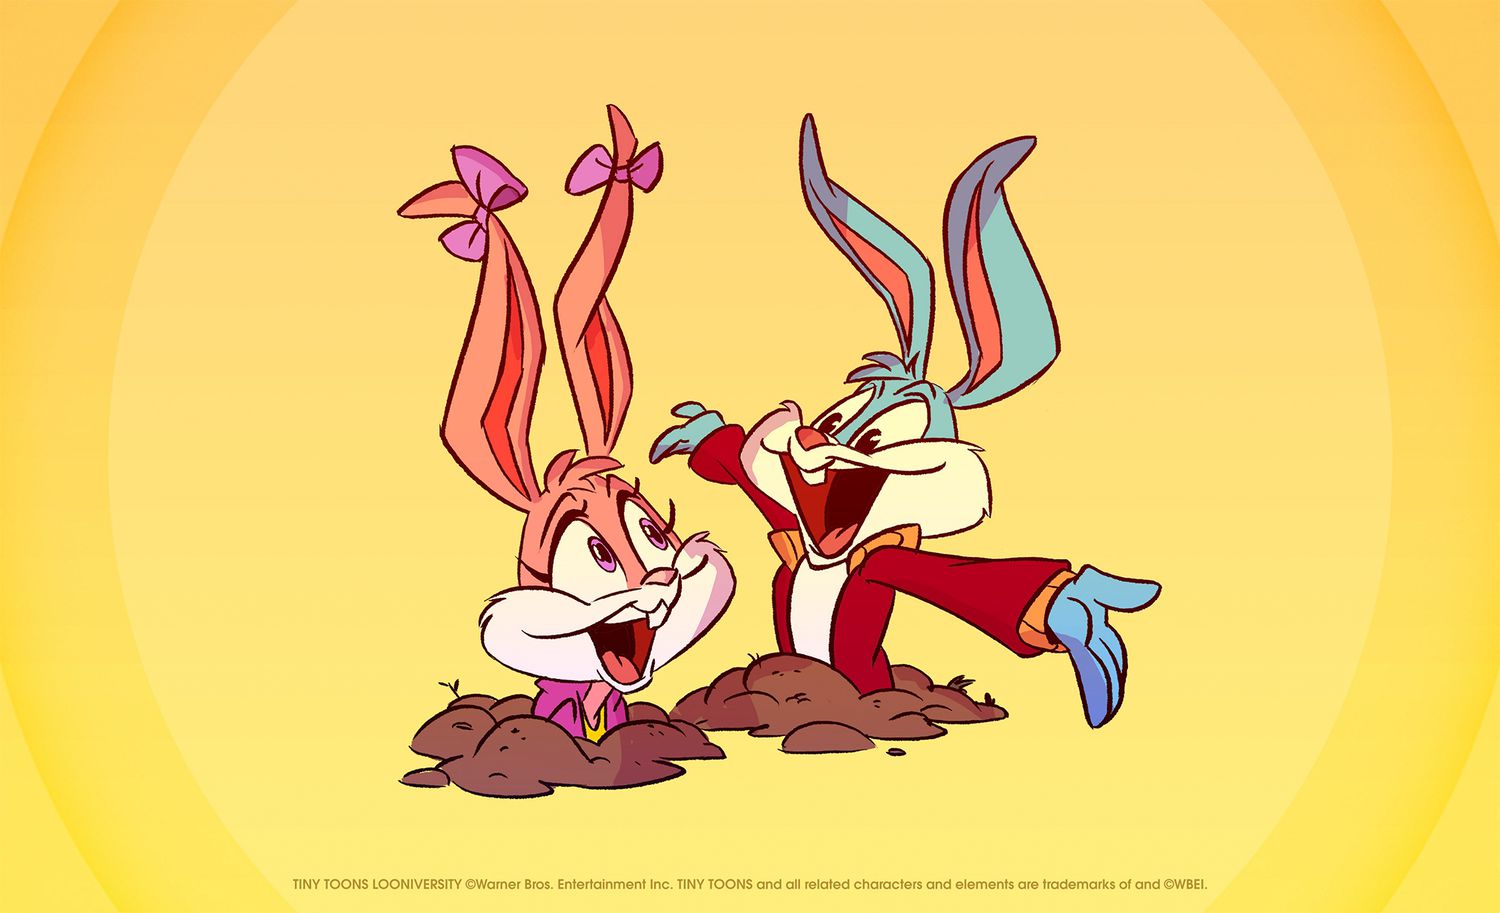 Tiny Toons reboot coming to Cartoon Network and HBO Max 